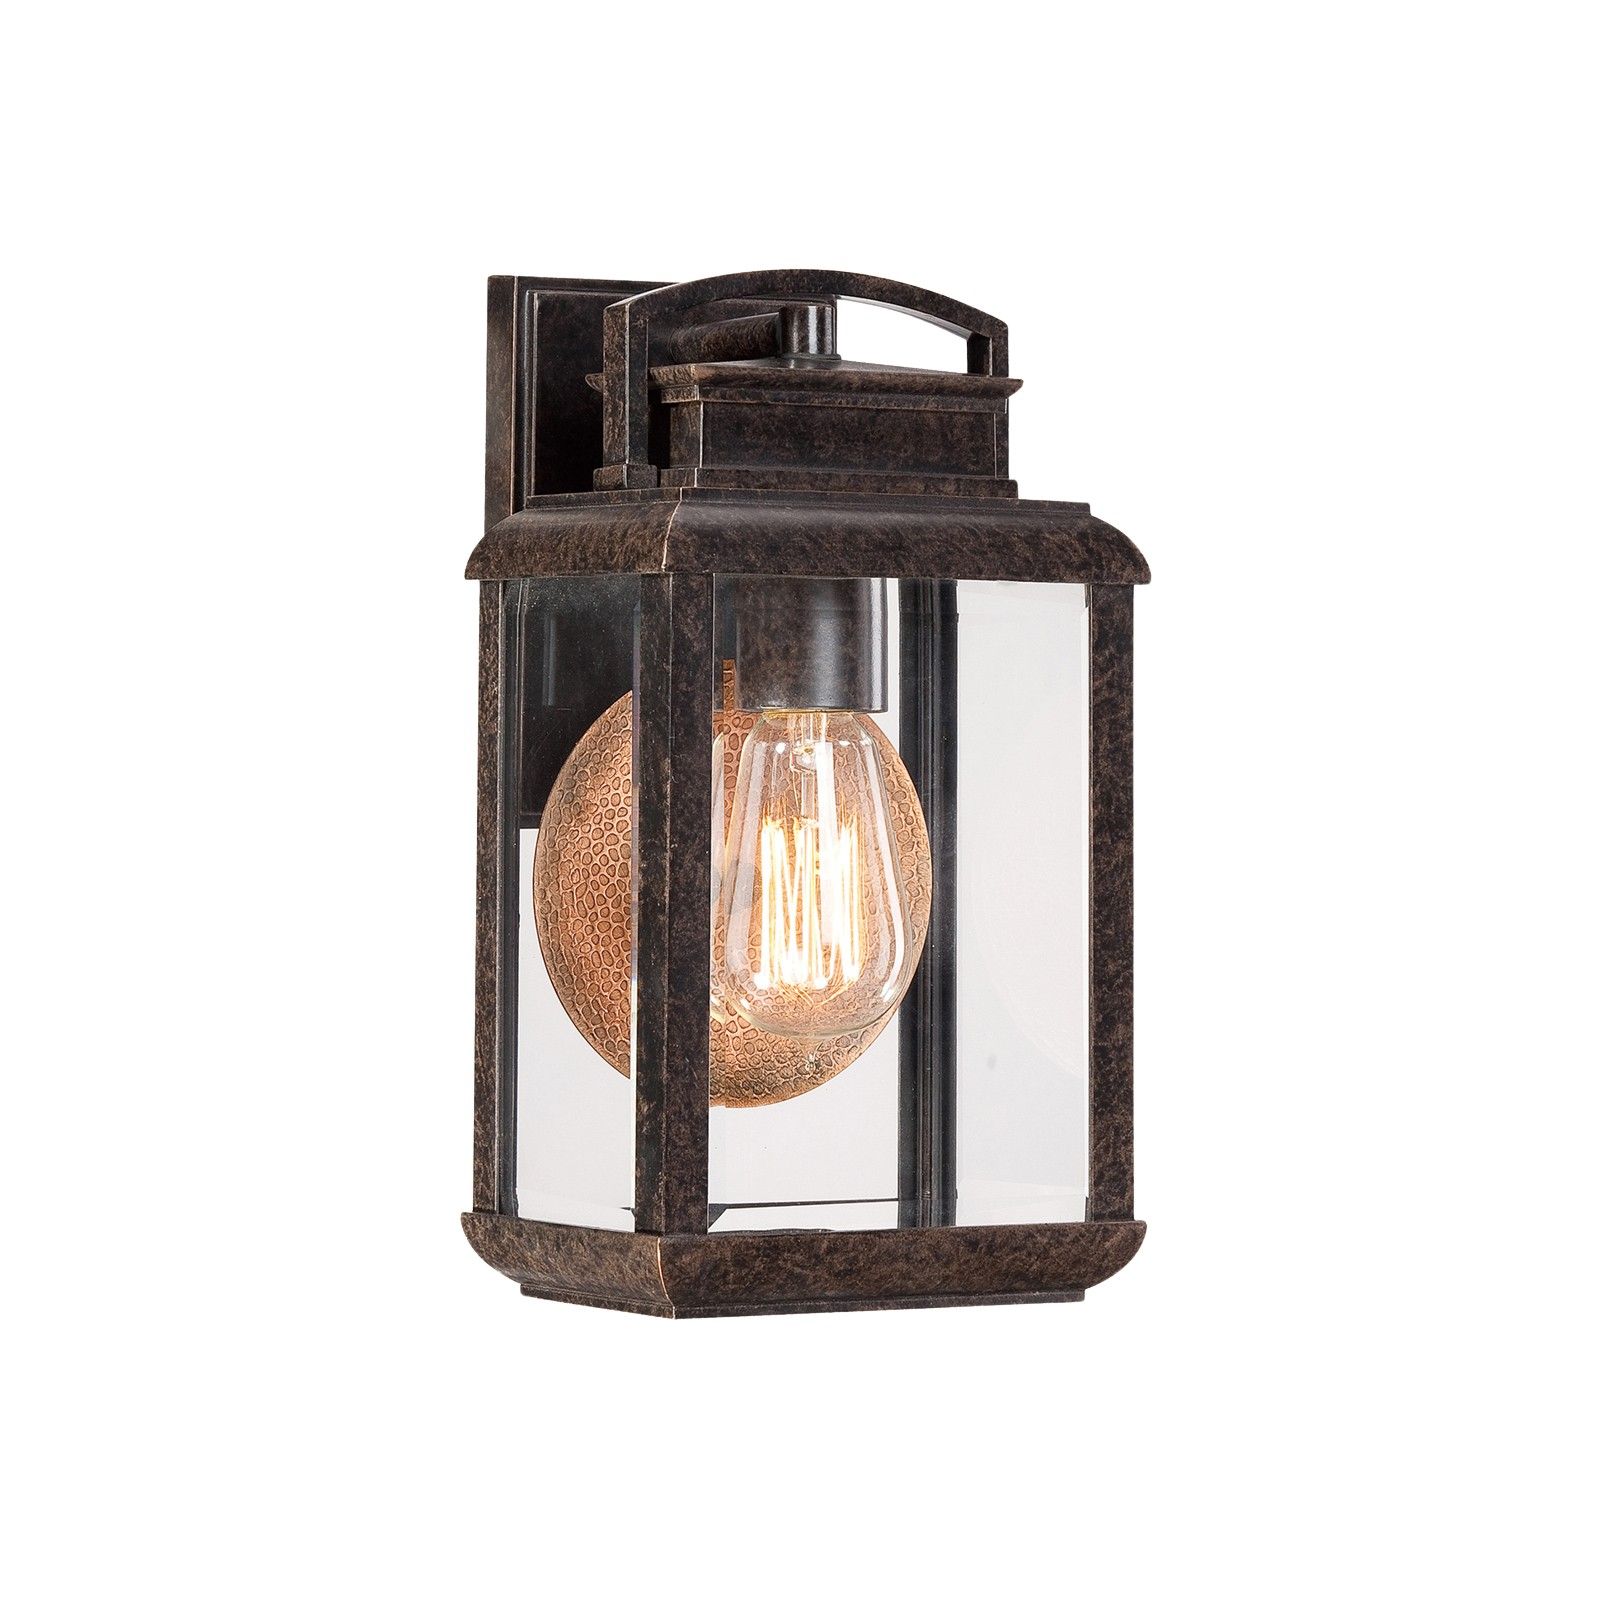 Byron small wall lantern in Imperial Bronze